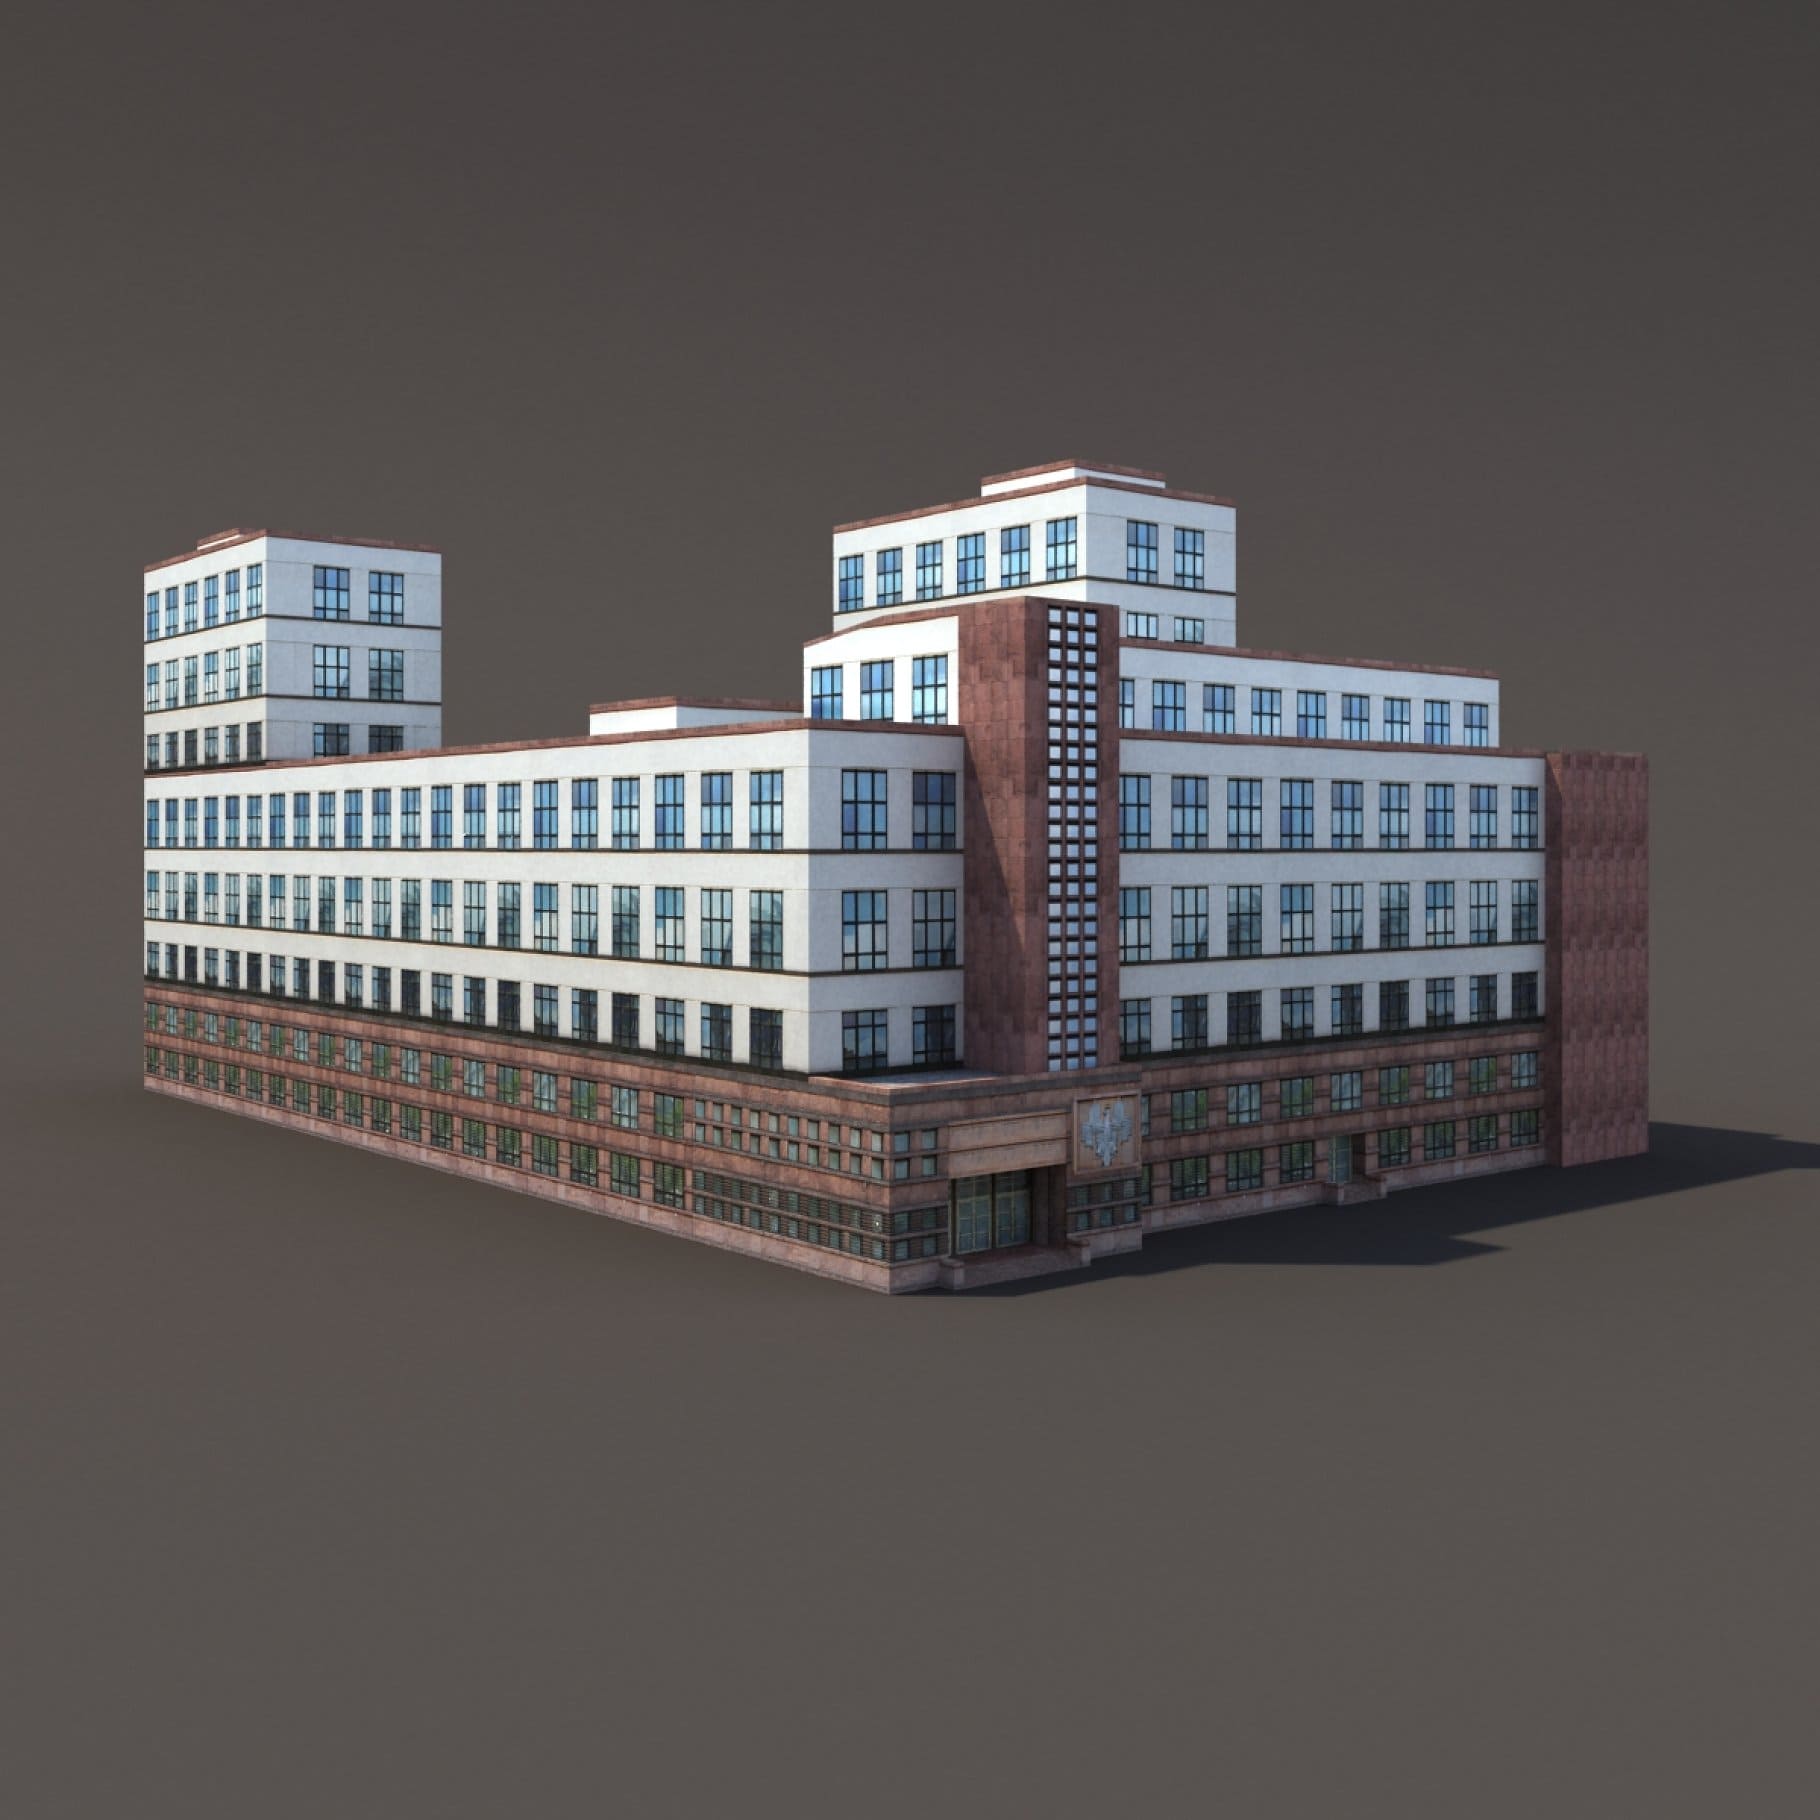 A small 3D model of a large office building.